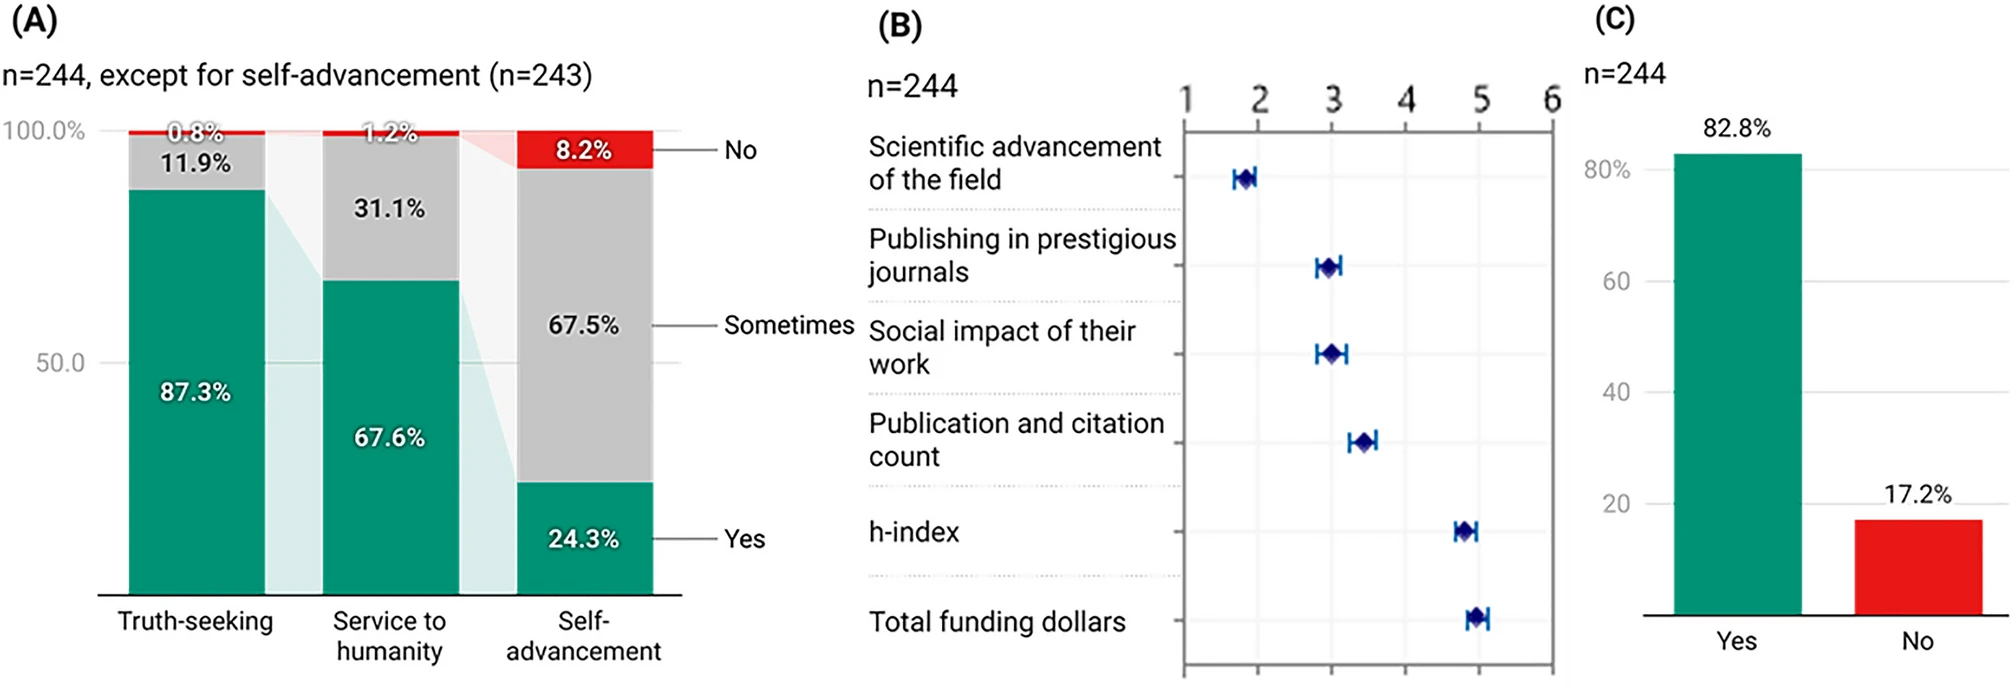 Figure 1 from [@Roy2023-wl](http://dx.doi.org/10.1038/s41598-023-32445-3). Science and scientists. (A) NSF Fellows who believe research is or should be about truth-seeking, service to humanity, or self-advancement. (B) Criteria Fellows use to evaluate academic peers (ranked in decreasing order of importance). (C) Whether Fellows applied the same criteria for themselves?